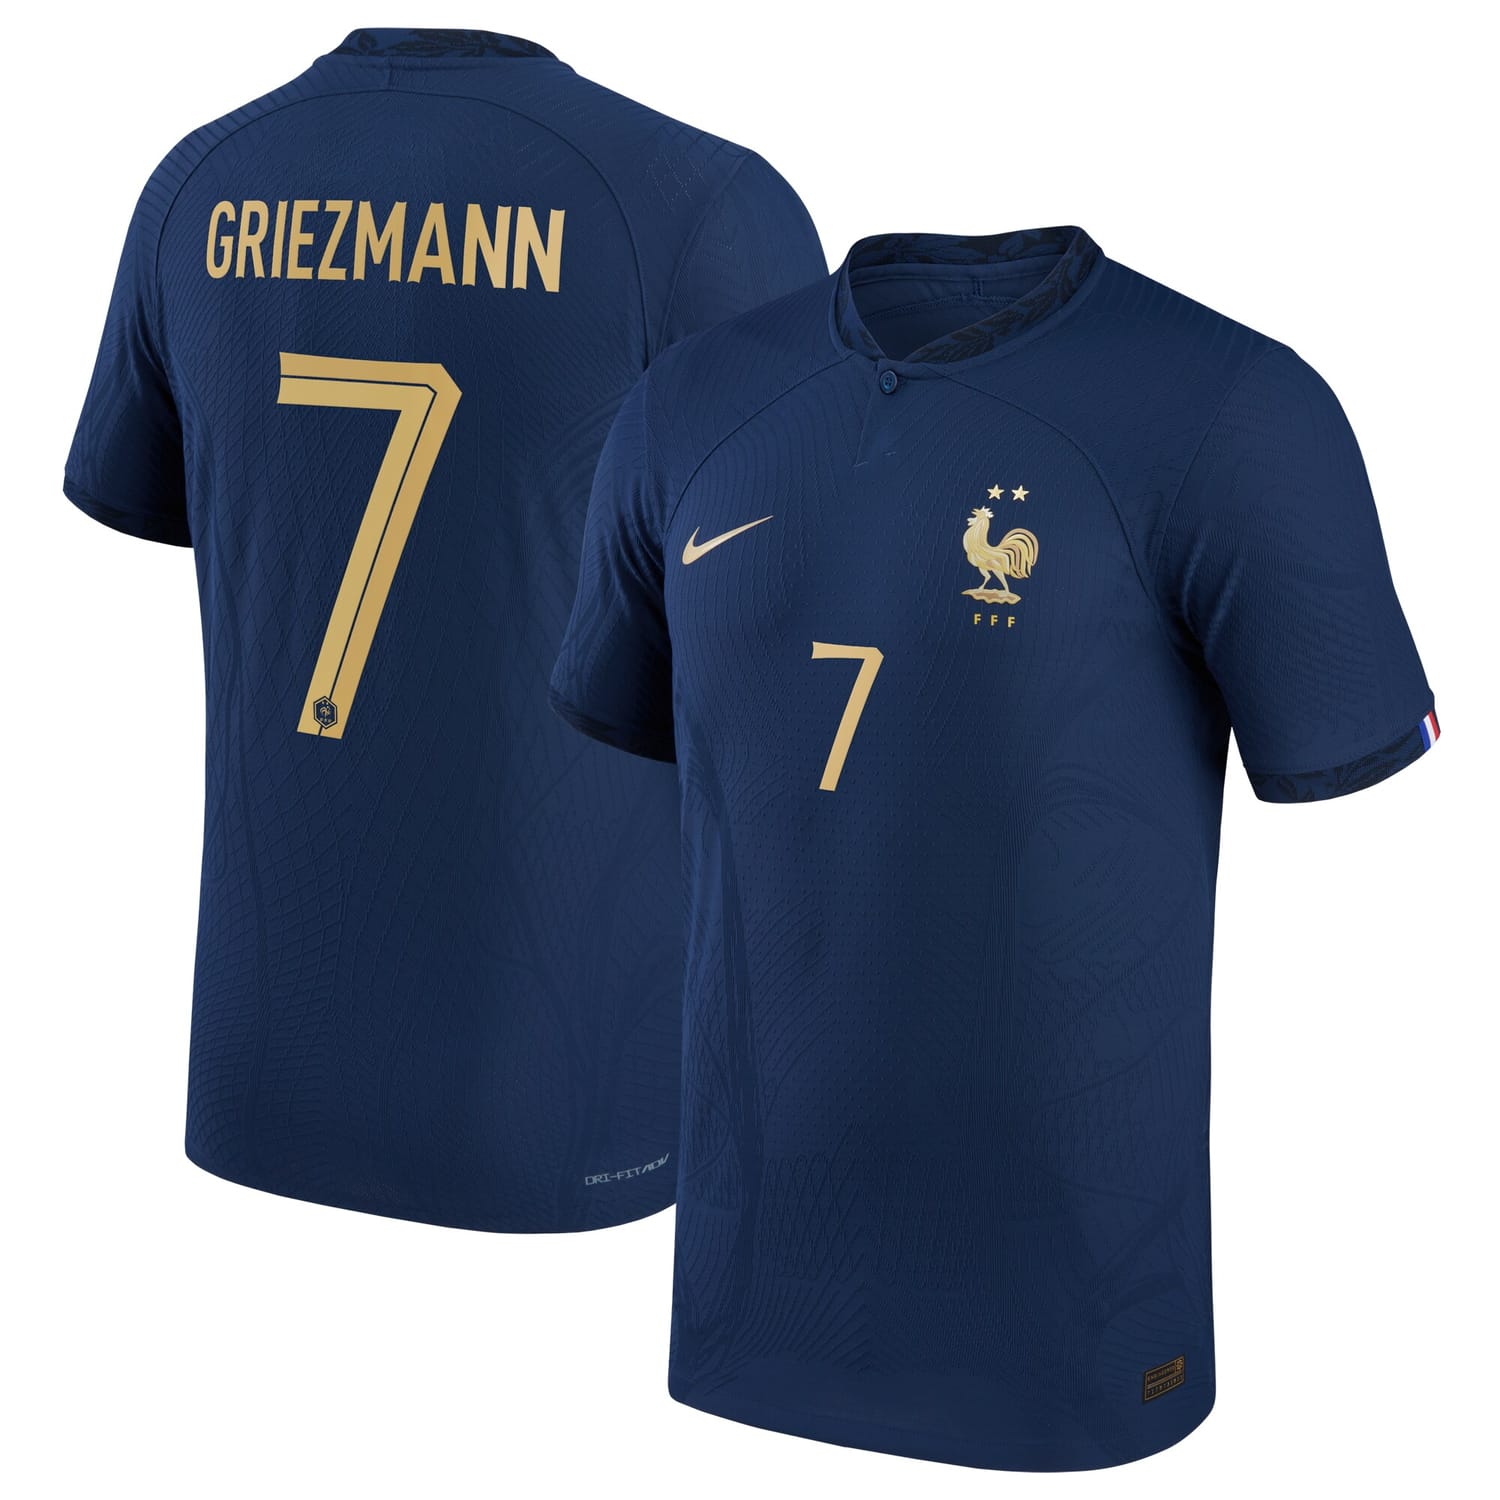 France National Team Home Authentic Jersey Shirt Navy 2022-23 player Antoine Griezmann printing for Men